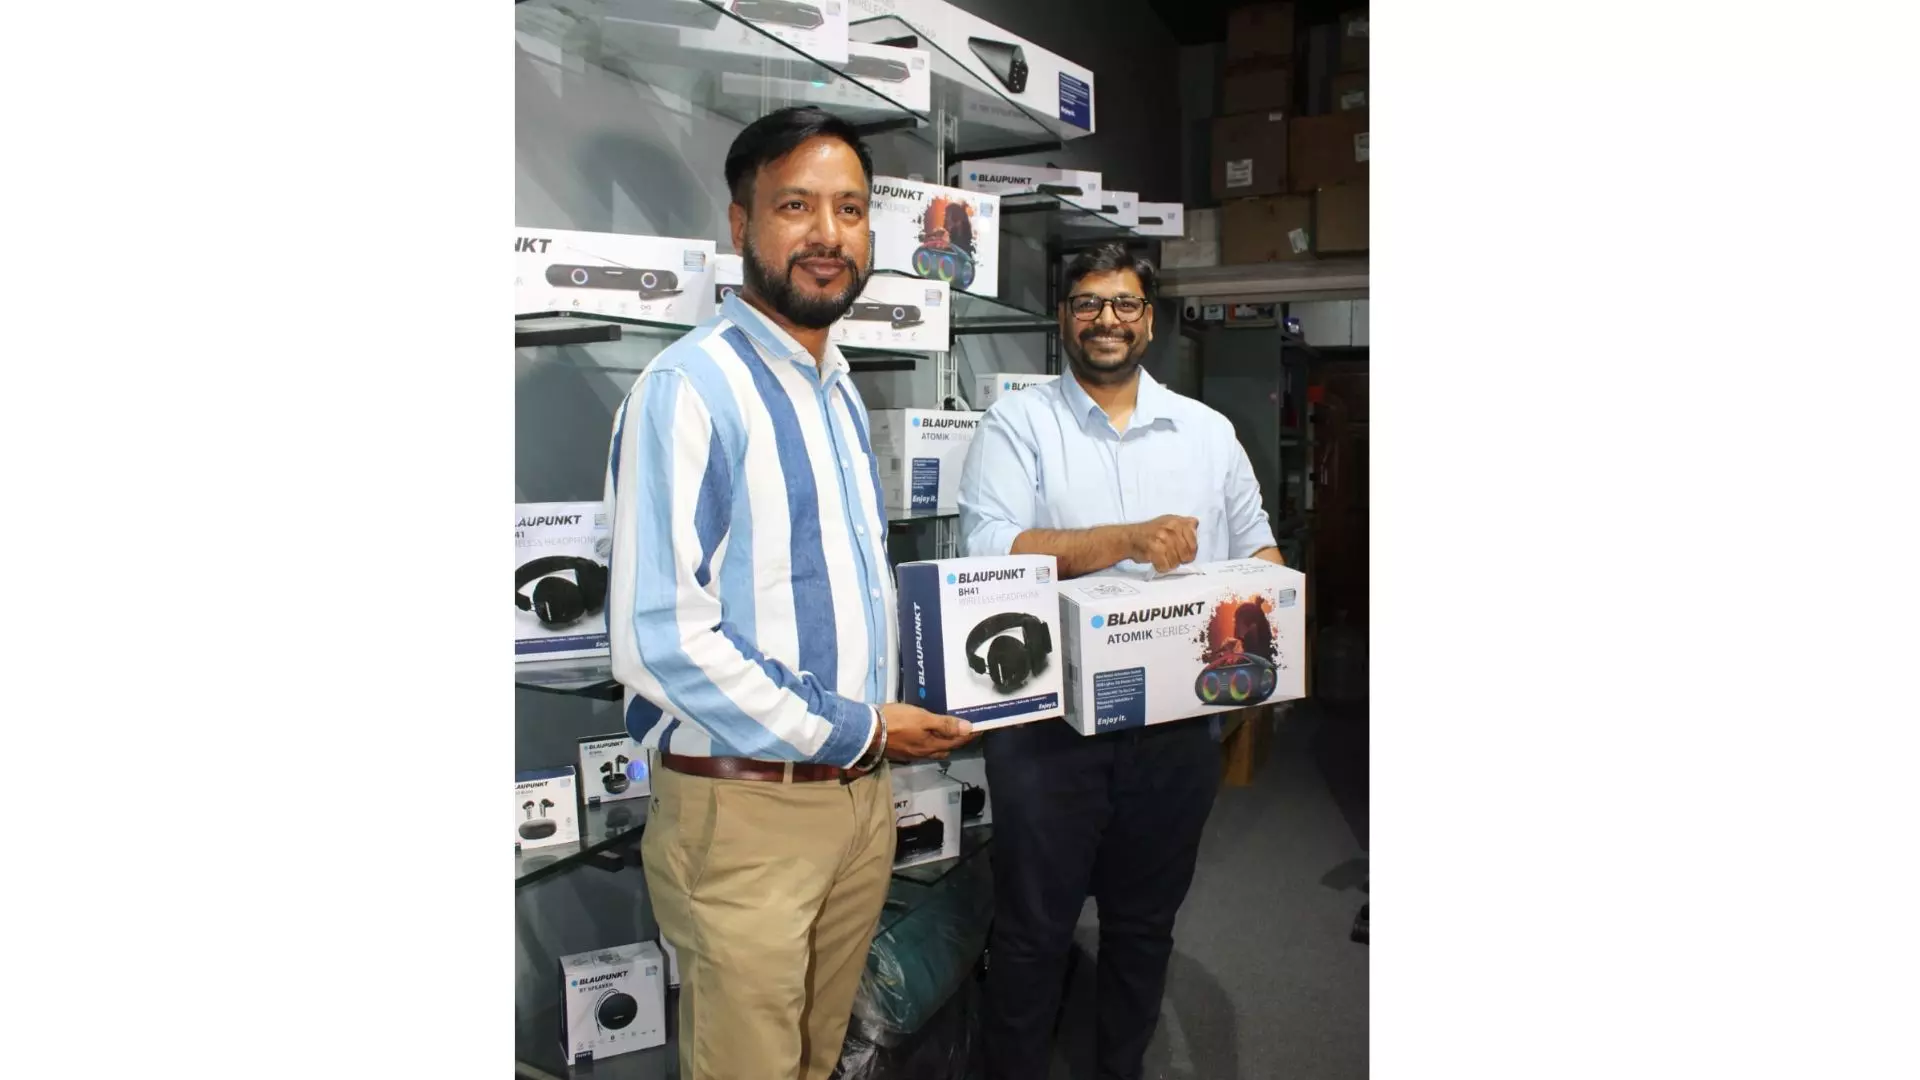 Blaupunkt appoints two new distributors in South